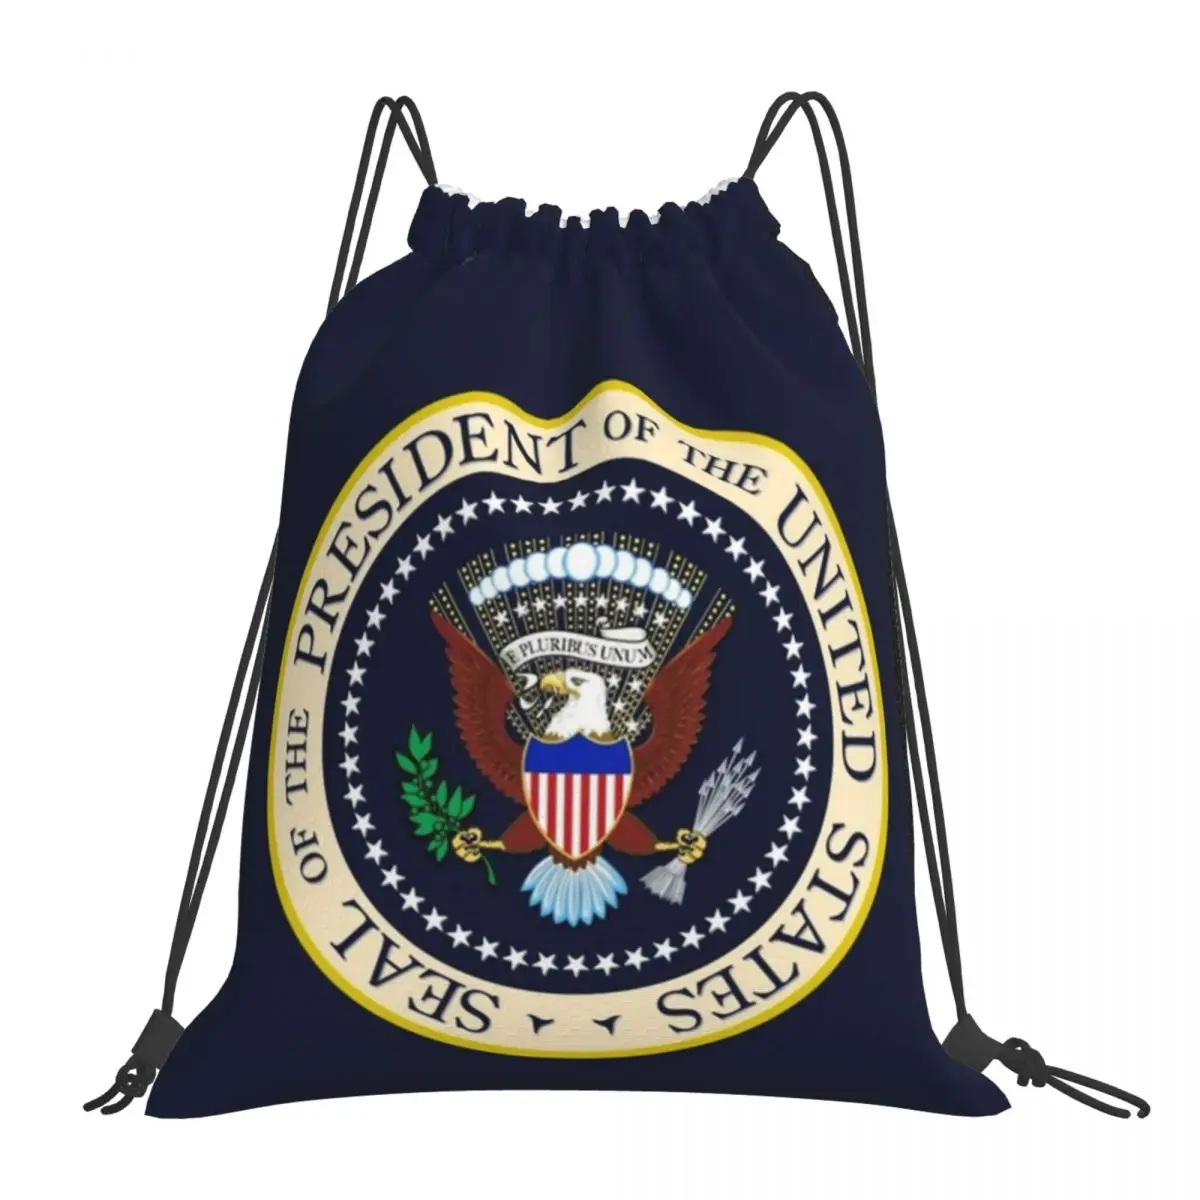 

Seal Of The President Of The United States Backpacks Drawstring Bags Drawstring Bundle Pocket Sports Bag Book Bags For Man Woman